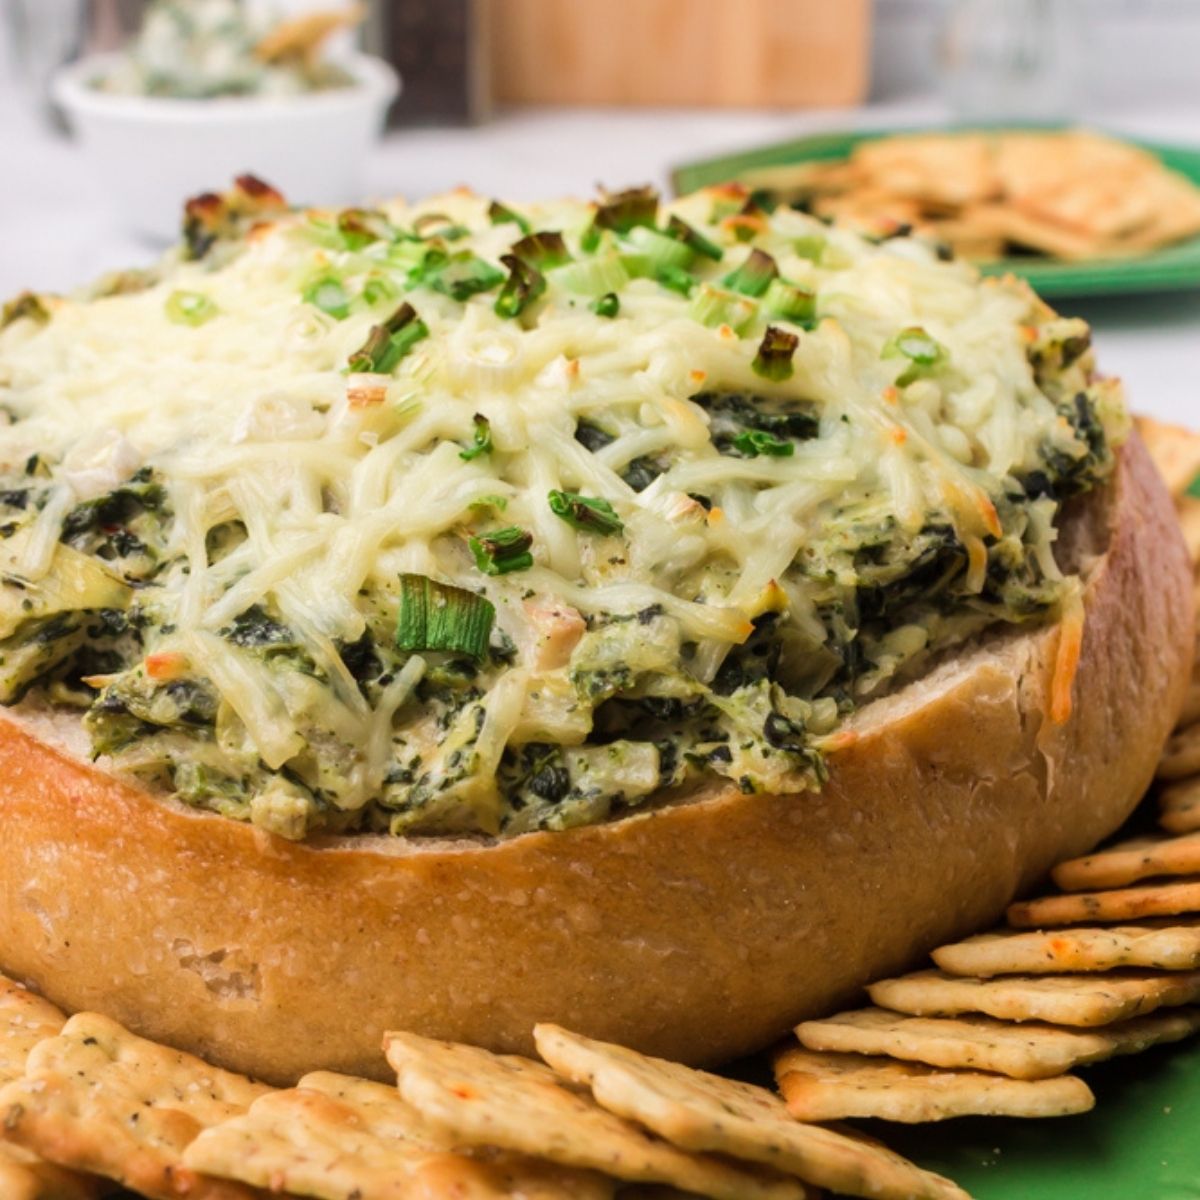 Homemade Baked Knorr Spinach Dip in a bread bowl.